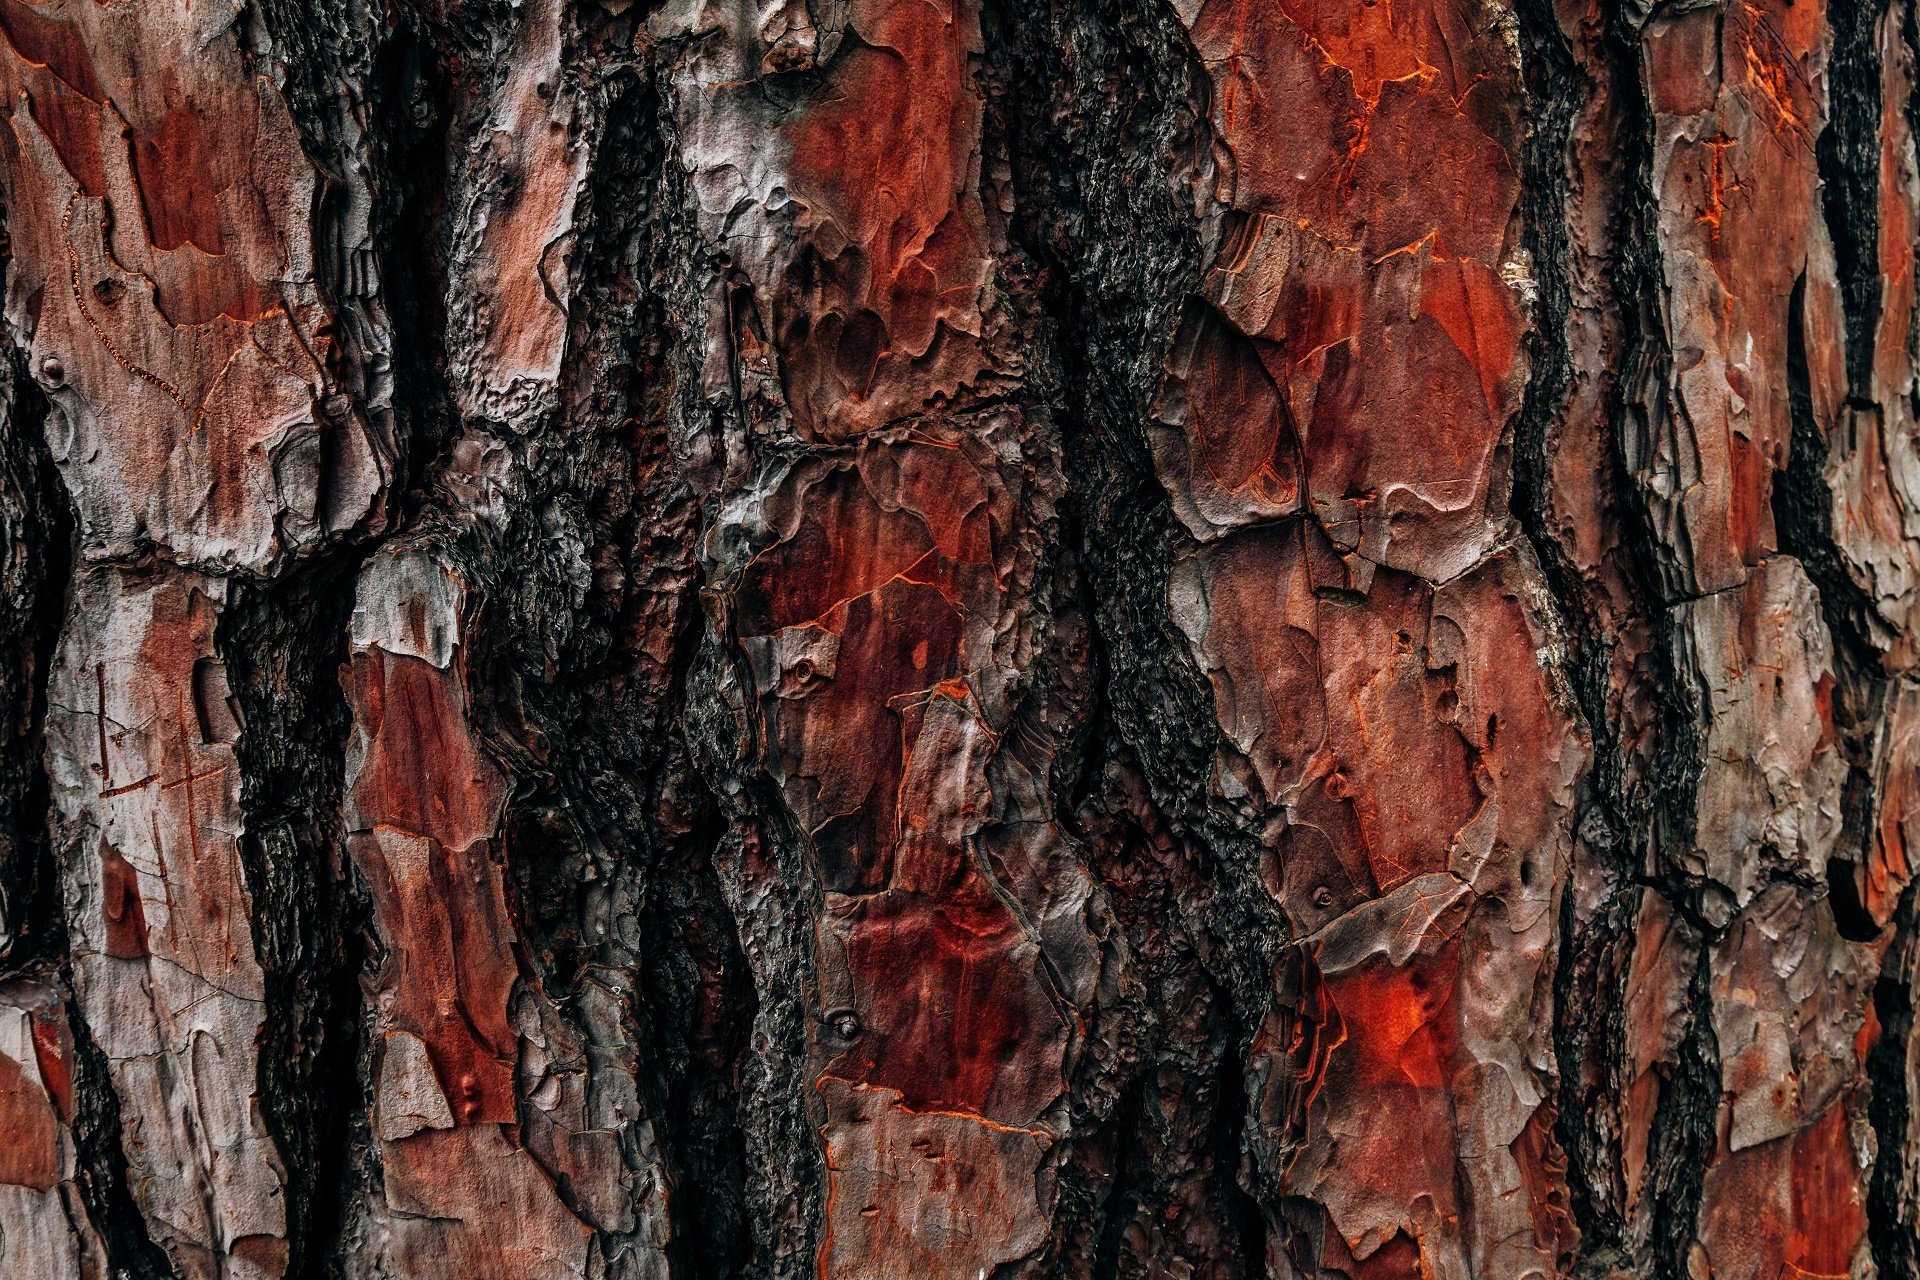 Download wallpaper 1350x2400 bark tree texture relief iphone  876s6 for parallax hd background